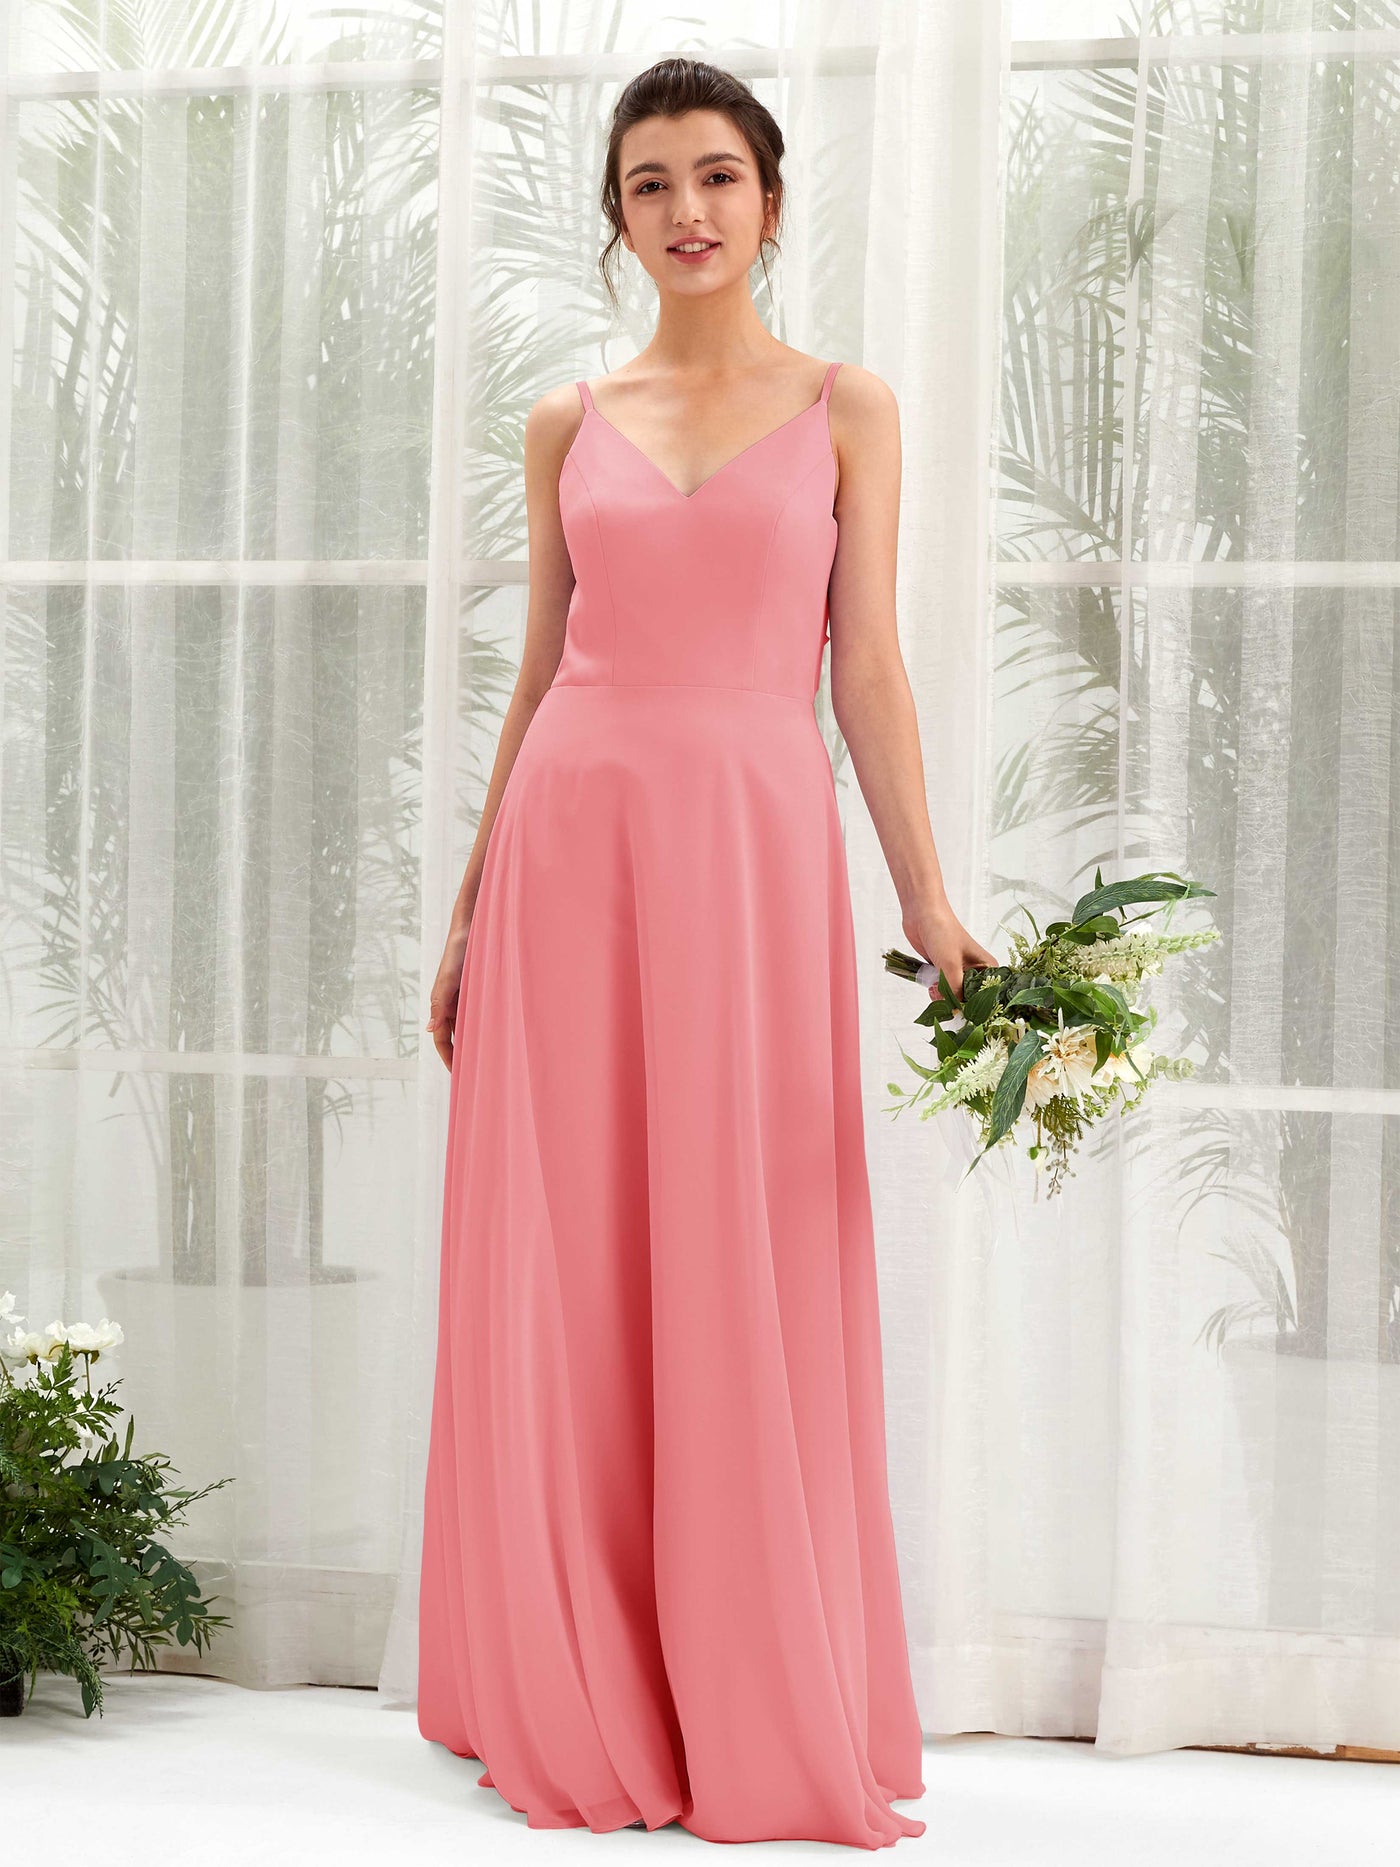 Coral Pink Bridesmaid Dresses Bridesmaid Dress A-line Chiffon Spaghetti-straps Full Length Sleeveless Wedding Party Dress (81220630)#color_coral-pink